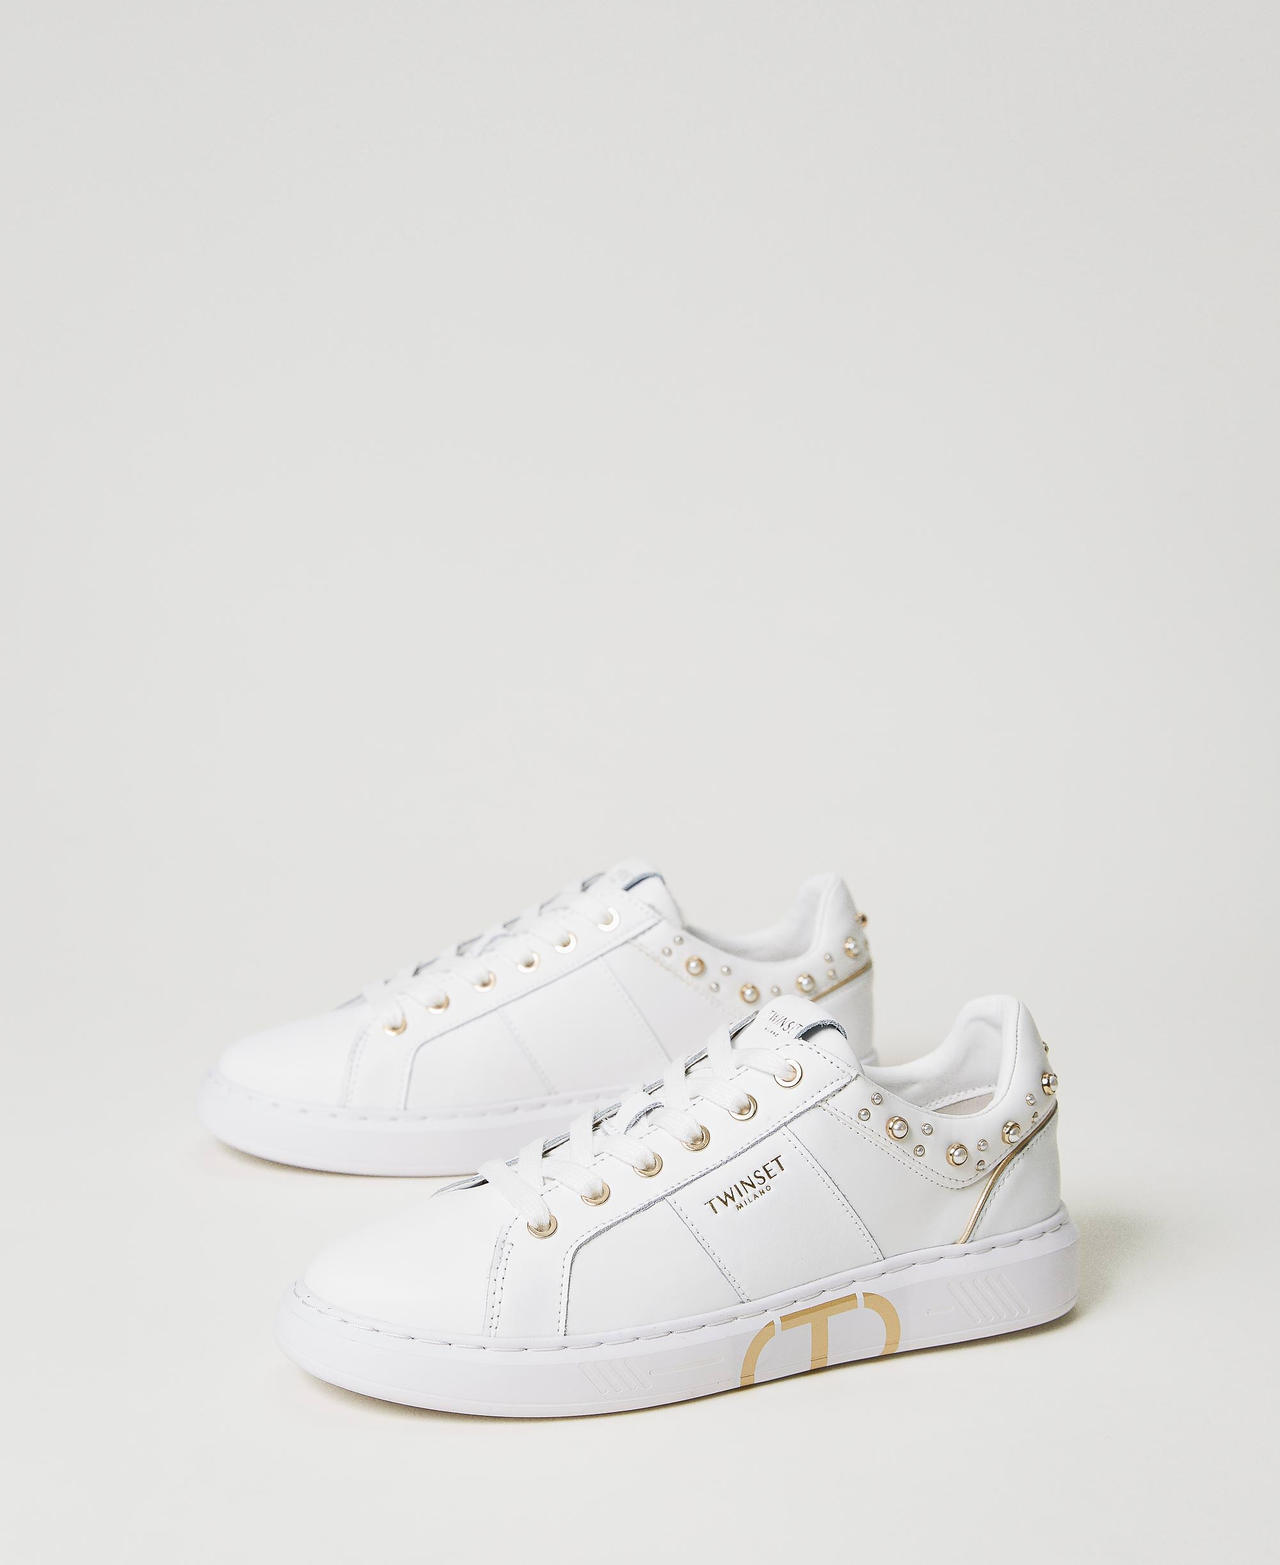 Sneakers con cuentas Blanco Mujer 231TCP060-02